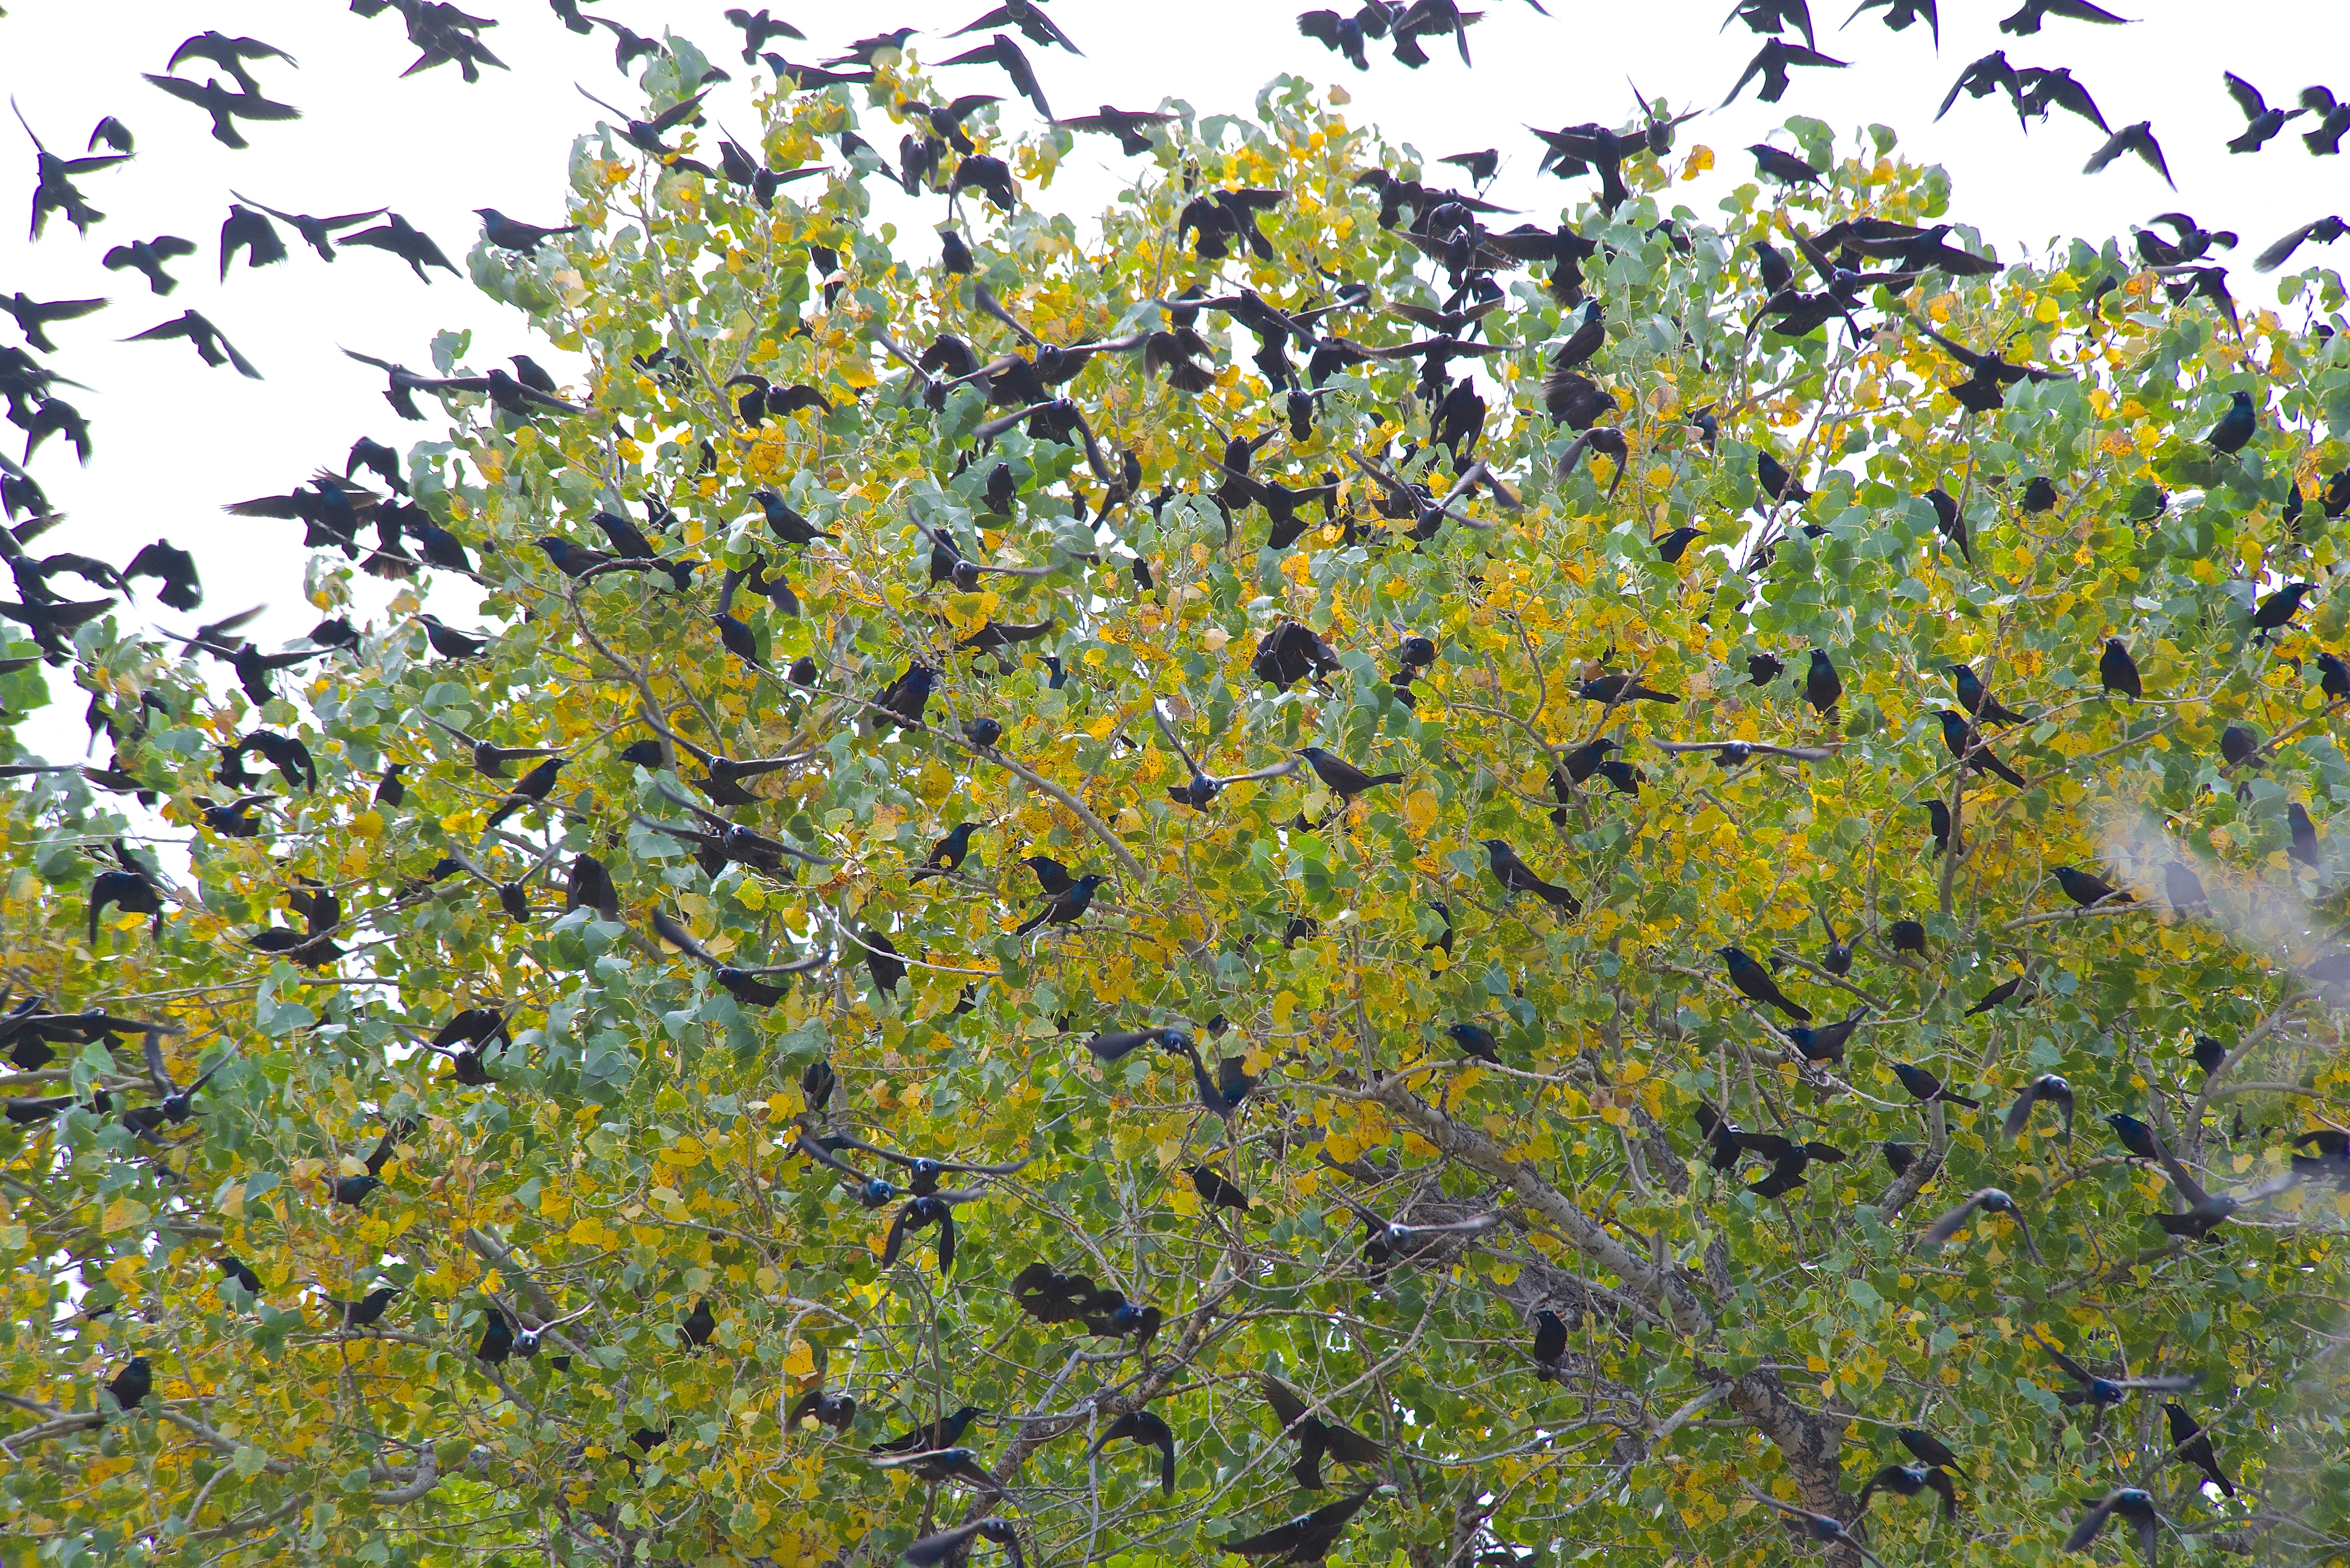 Common Grackles Migrating